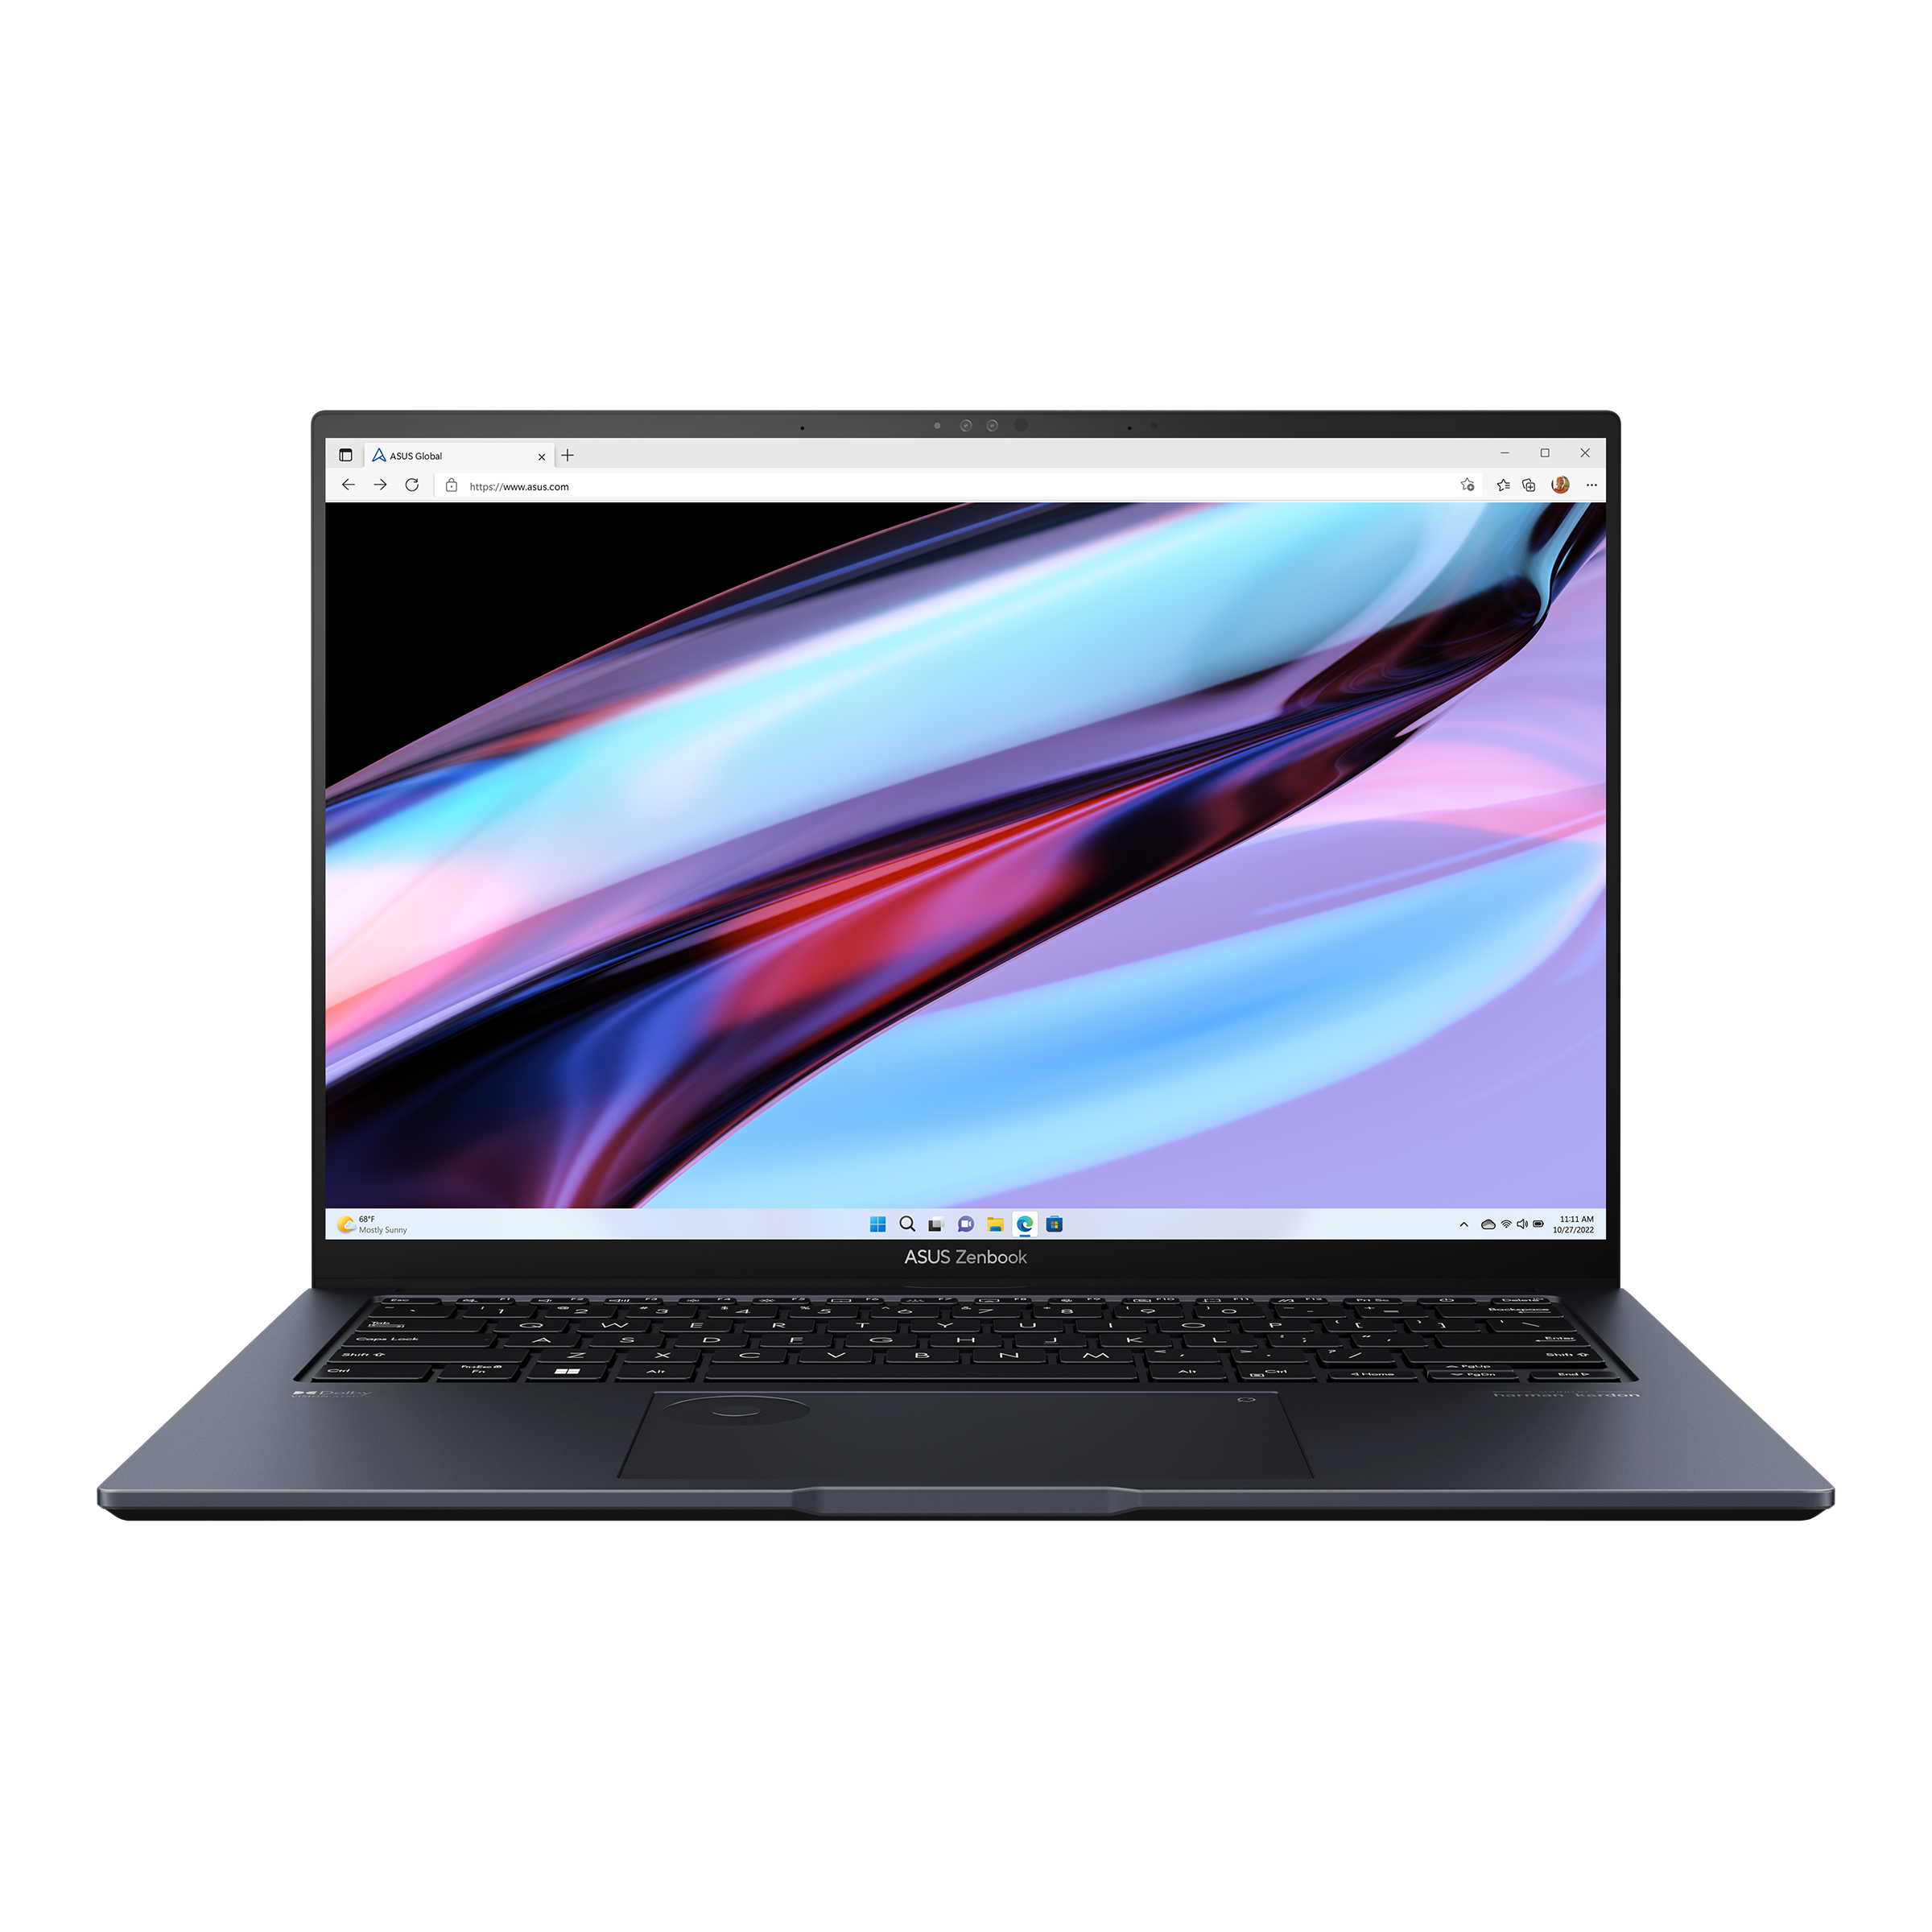 Asus Zenbook 14 OLED With Up to Intel Core Ultra 9 Processors Launched:  Price, Specifications